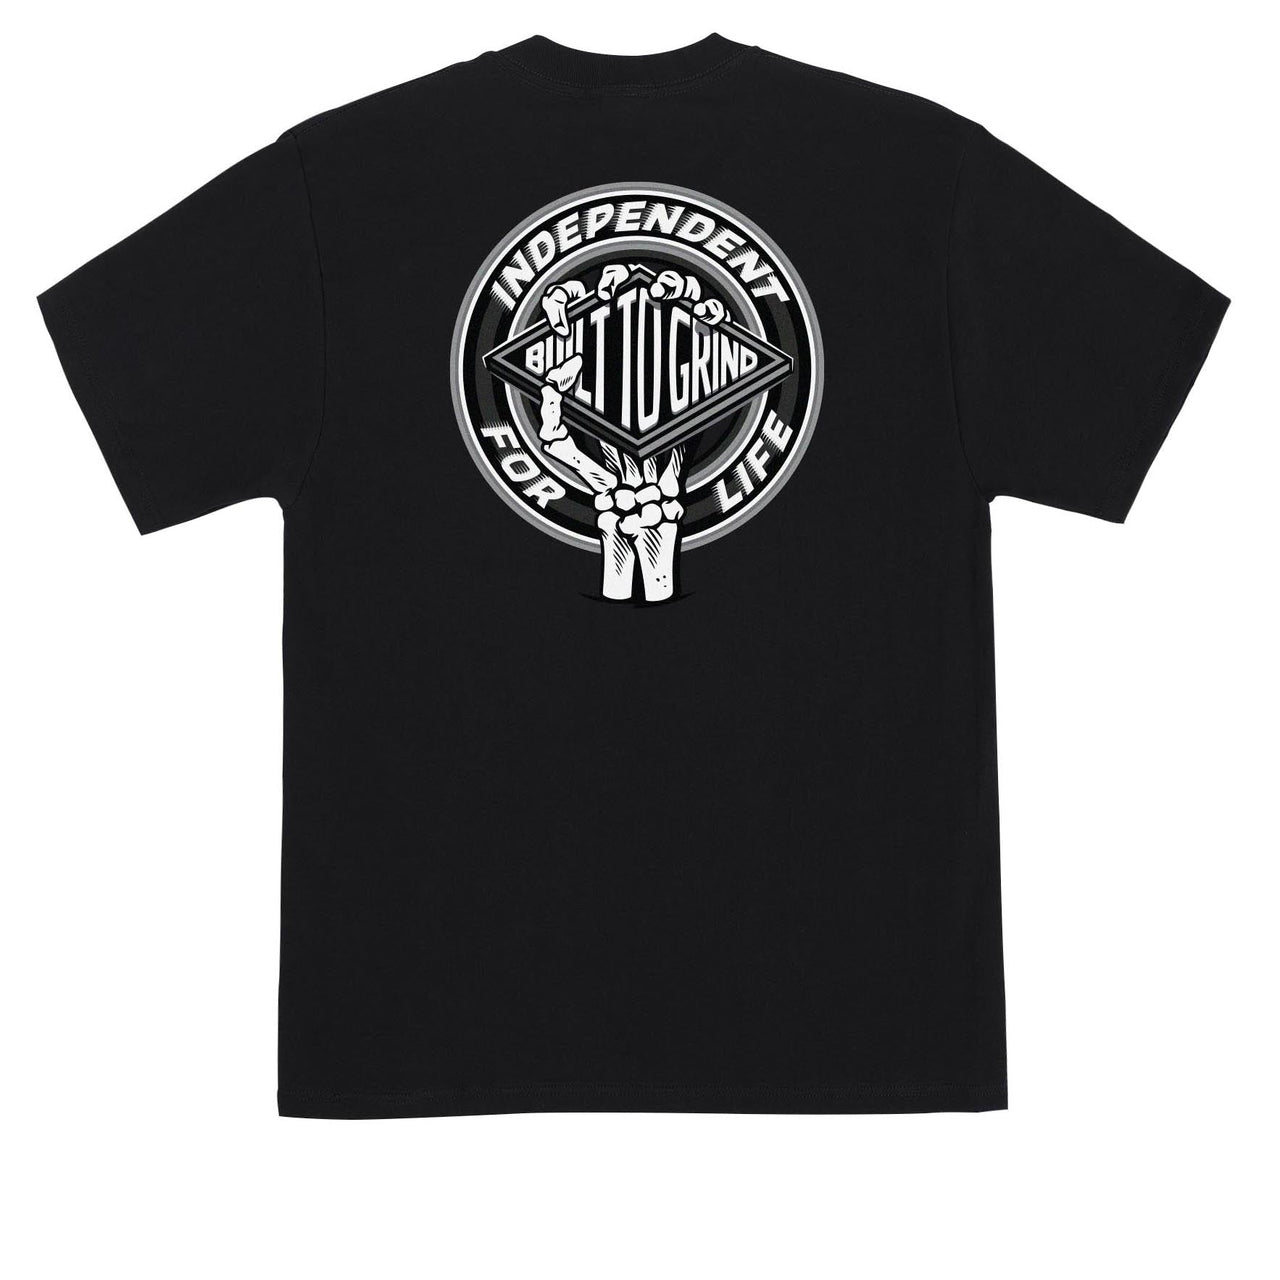 Independent For Life Clutch T-Shirt - Black image 1